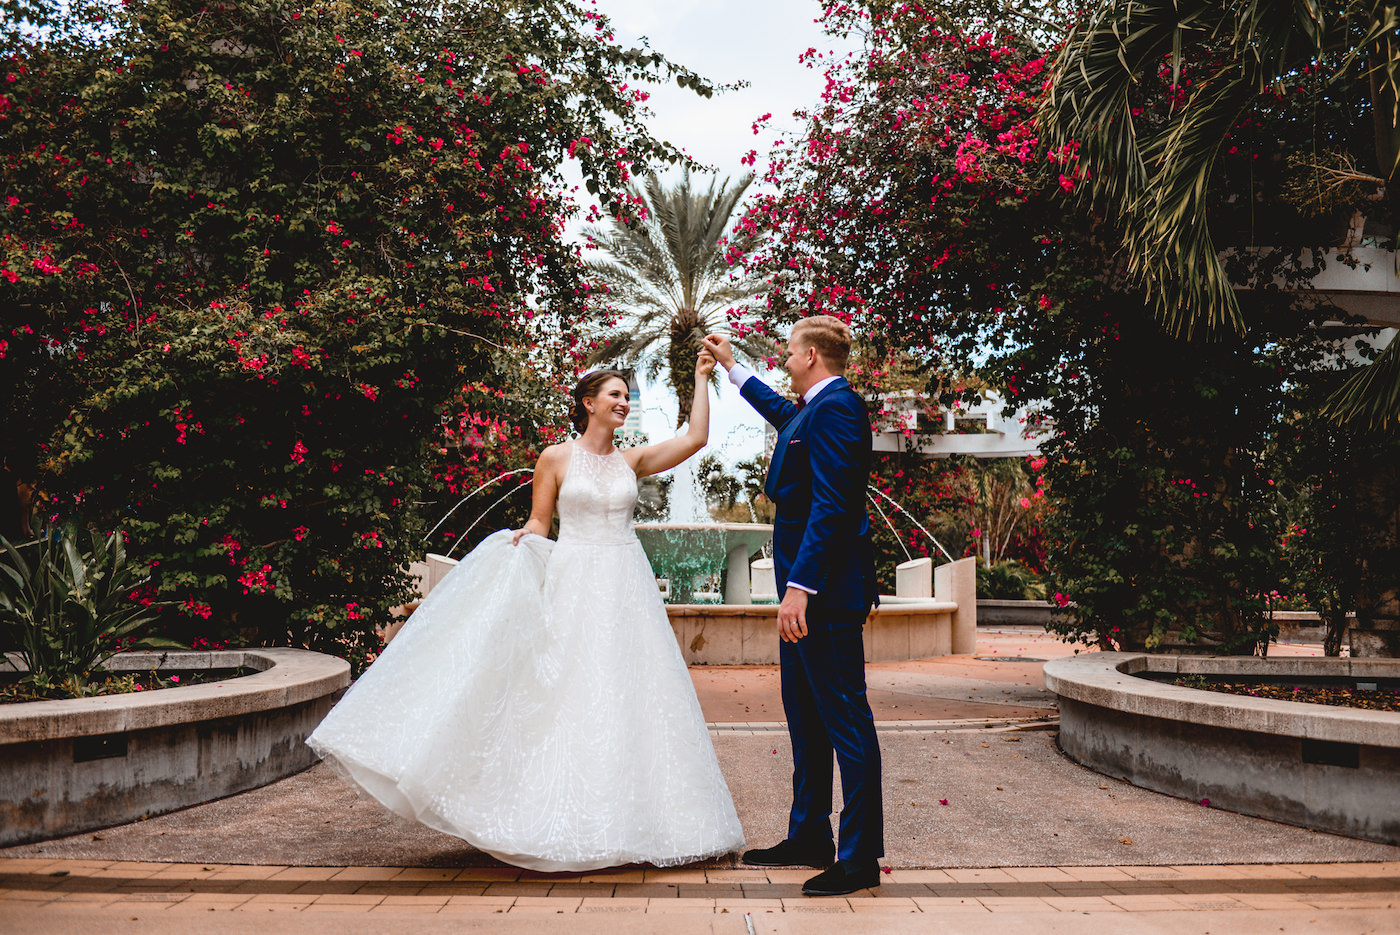 Bride and Groom Outdoor Portrait at St. Pete Wedding Venue The Poynter Institute | White Embroidered Organza Ballgown Illusion Neck Bib Neckline Bridal Gown | Groom Classic Navy Blue Suit | Tampa Wedding Dress Shop Truly Forever Bridal